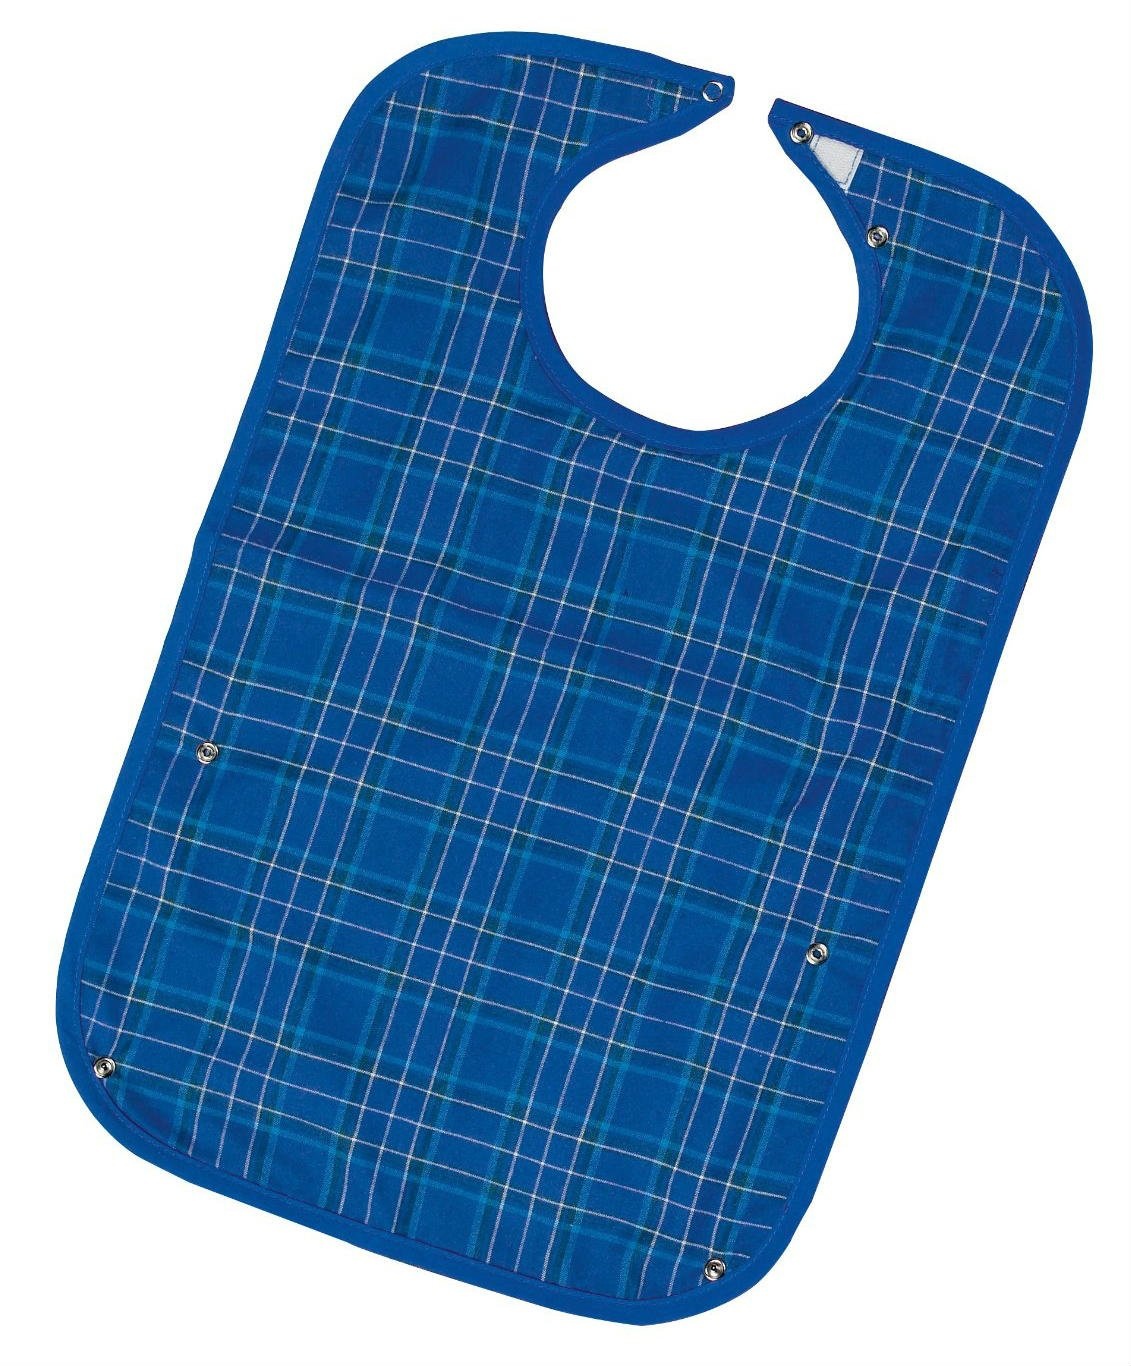 Homecraft Everyday Bib, Waterproof Adult Bib, Clothing Protector from Spills and Stains, Mealtime Bib Protector, Dinning Aid Apron, Washable, Medium, Blue, (Eligible for VAT relief in the UK)